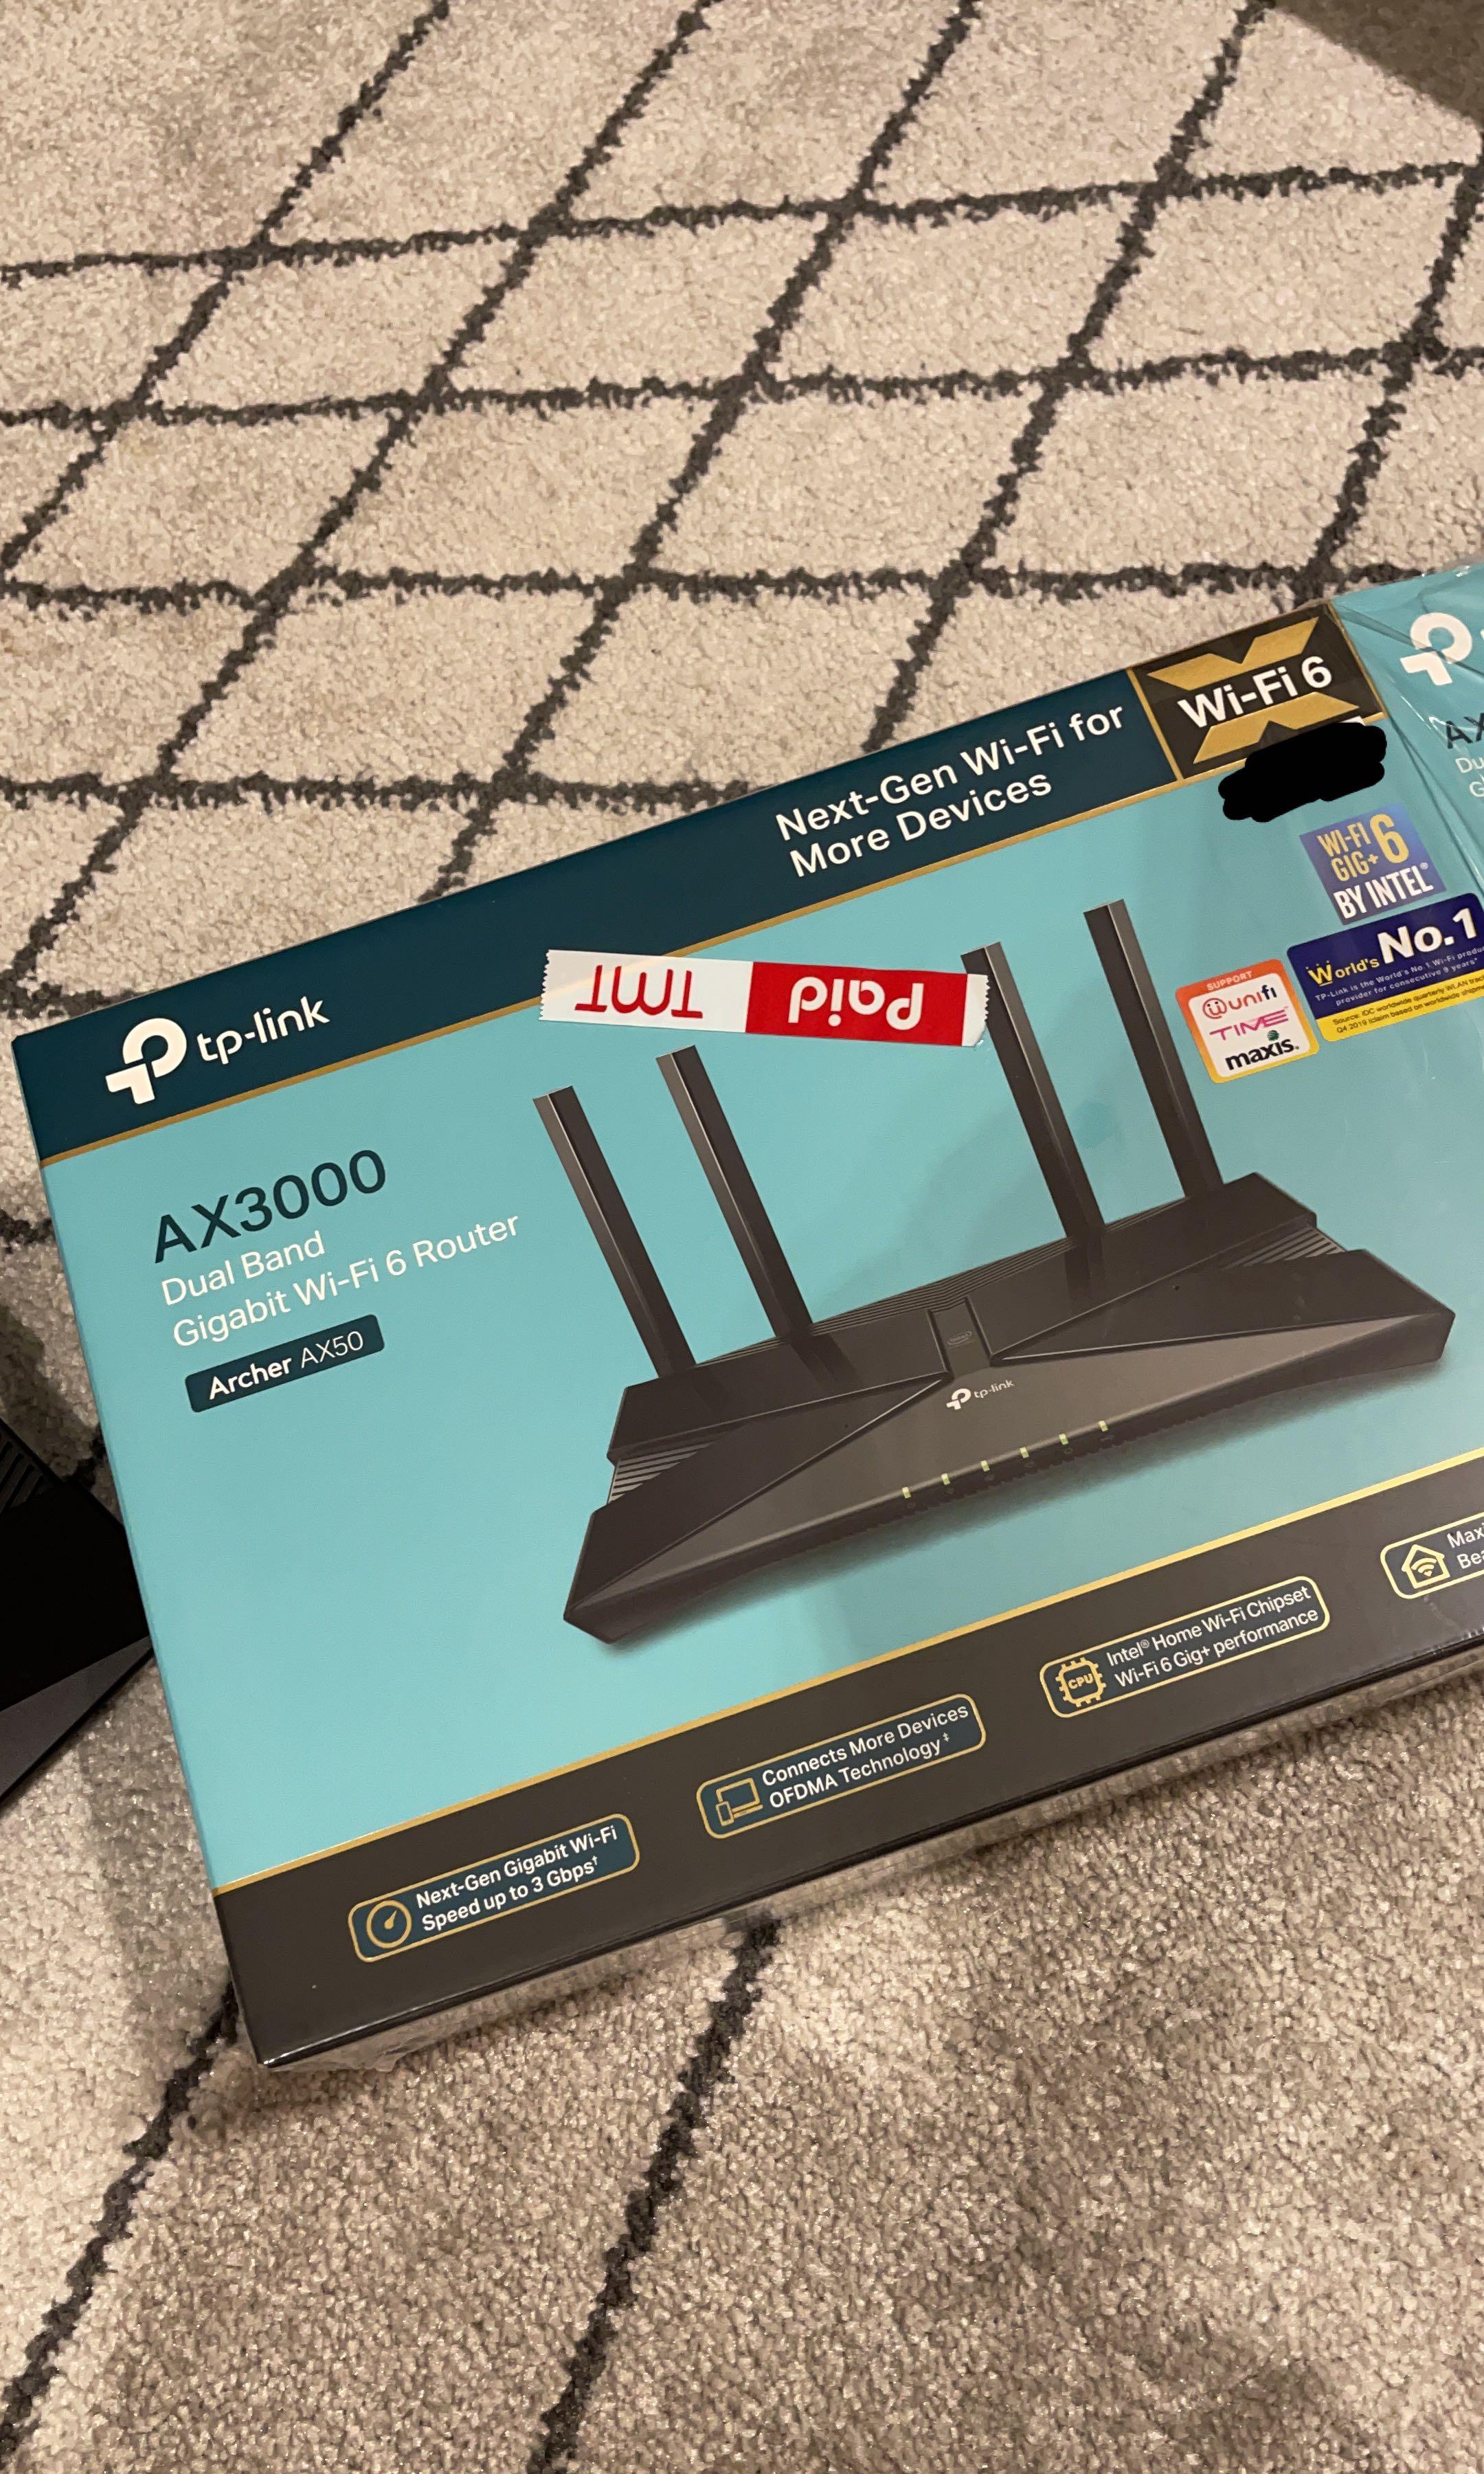 TP-Link Archer AX50 - AX3000 Dual Band Gigabit Wi-Fi 6 Router, Computers &  Tech, Parts & Accessories, Networking on Carousell